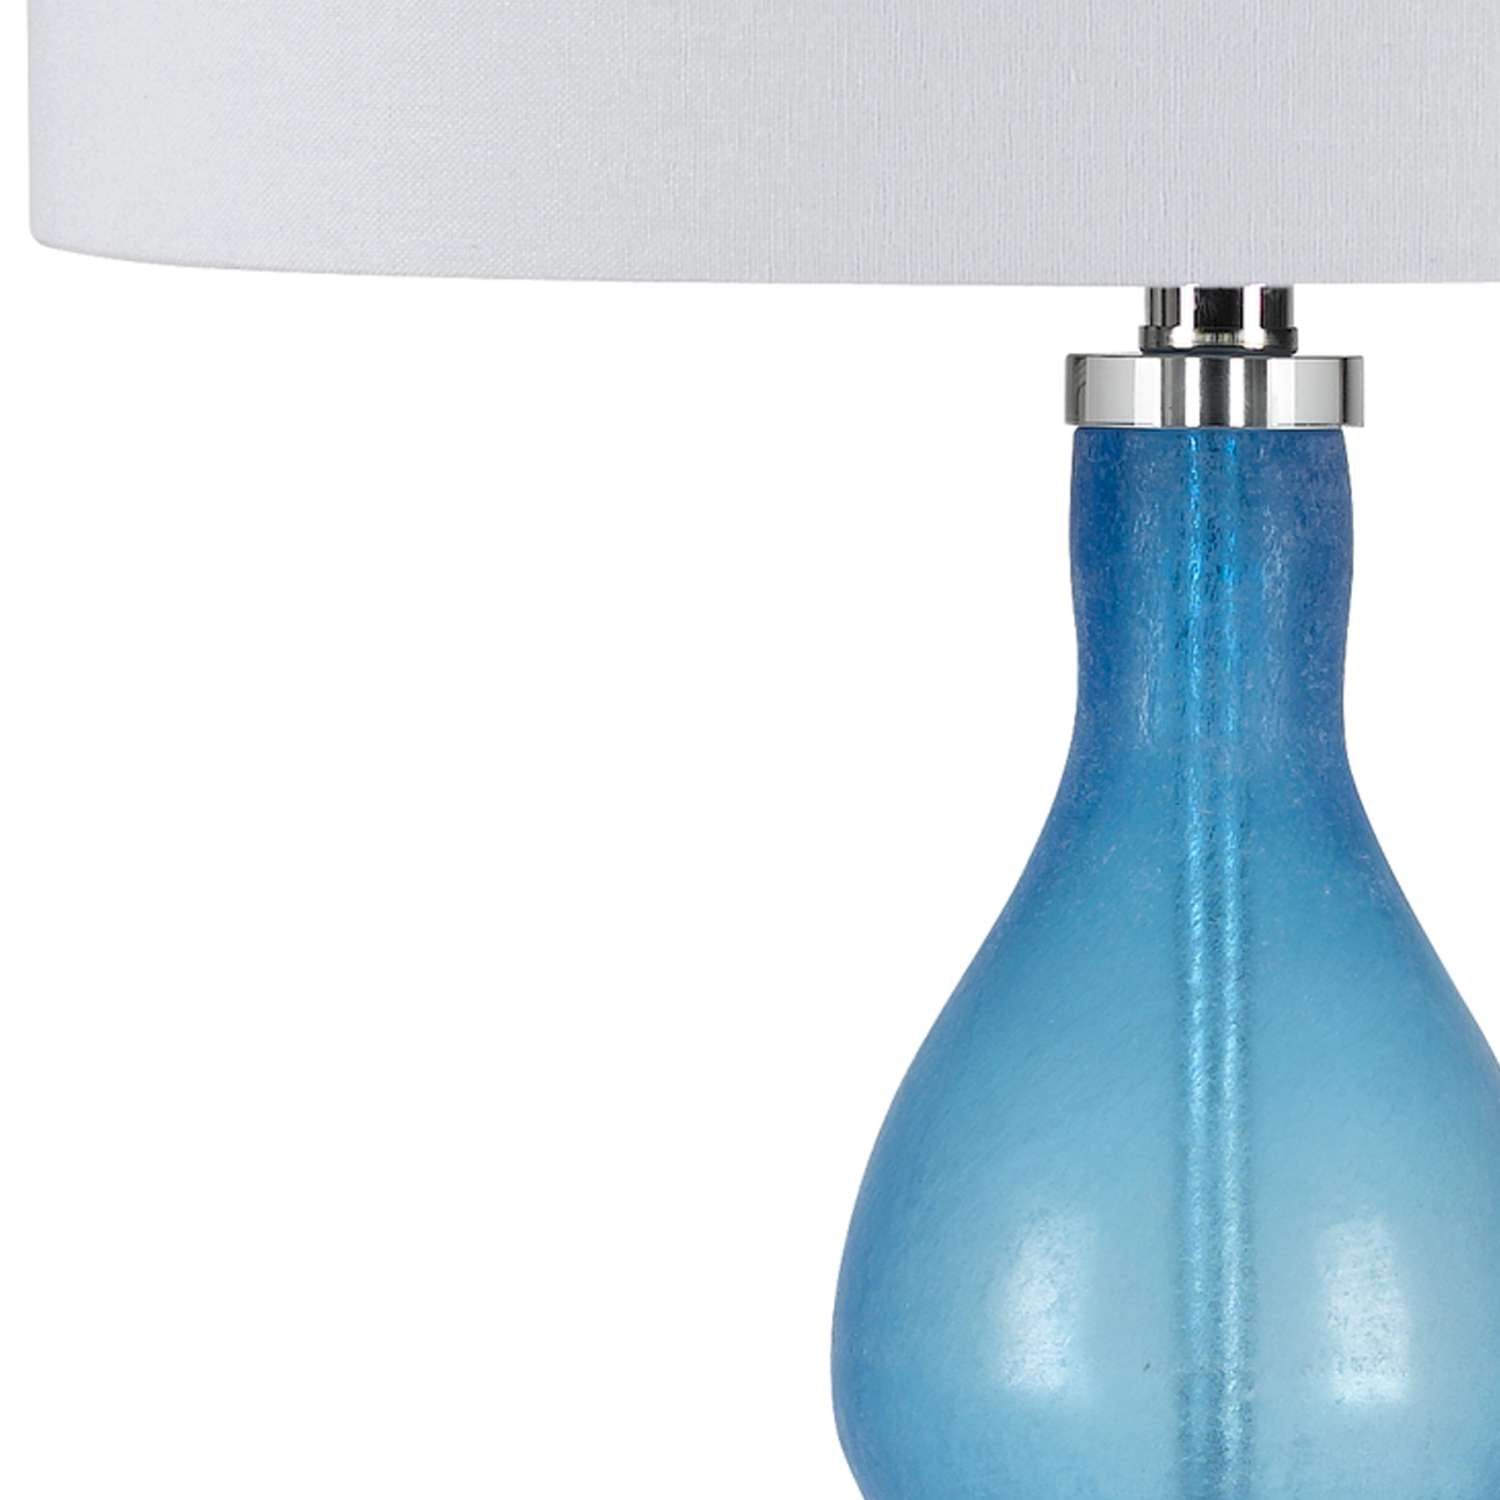 Resin Table Lamp With Turned Body And Fabric Drum Shade, Blue And White By Benzara